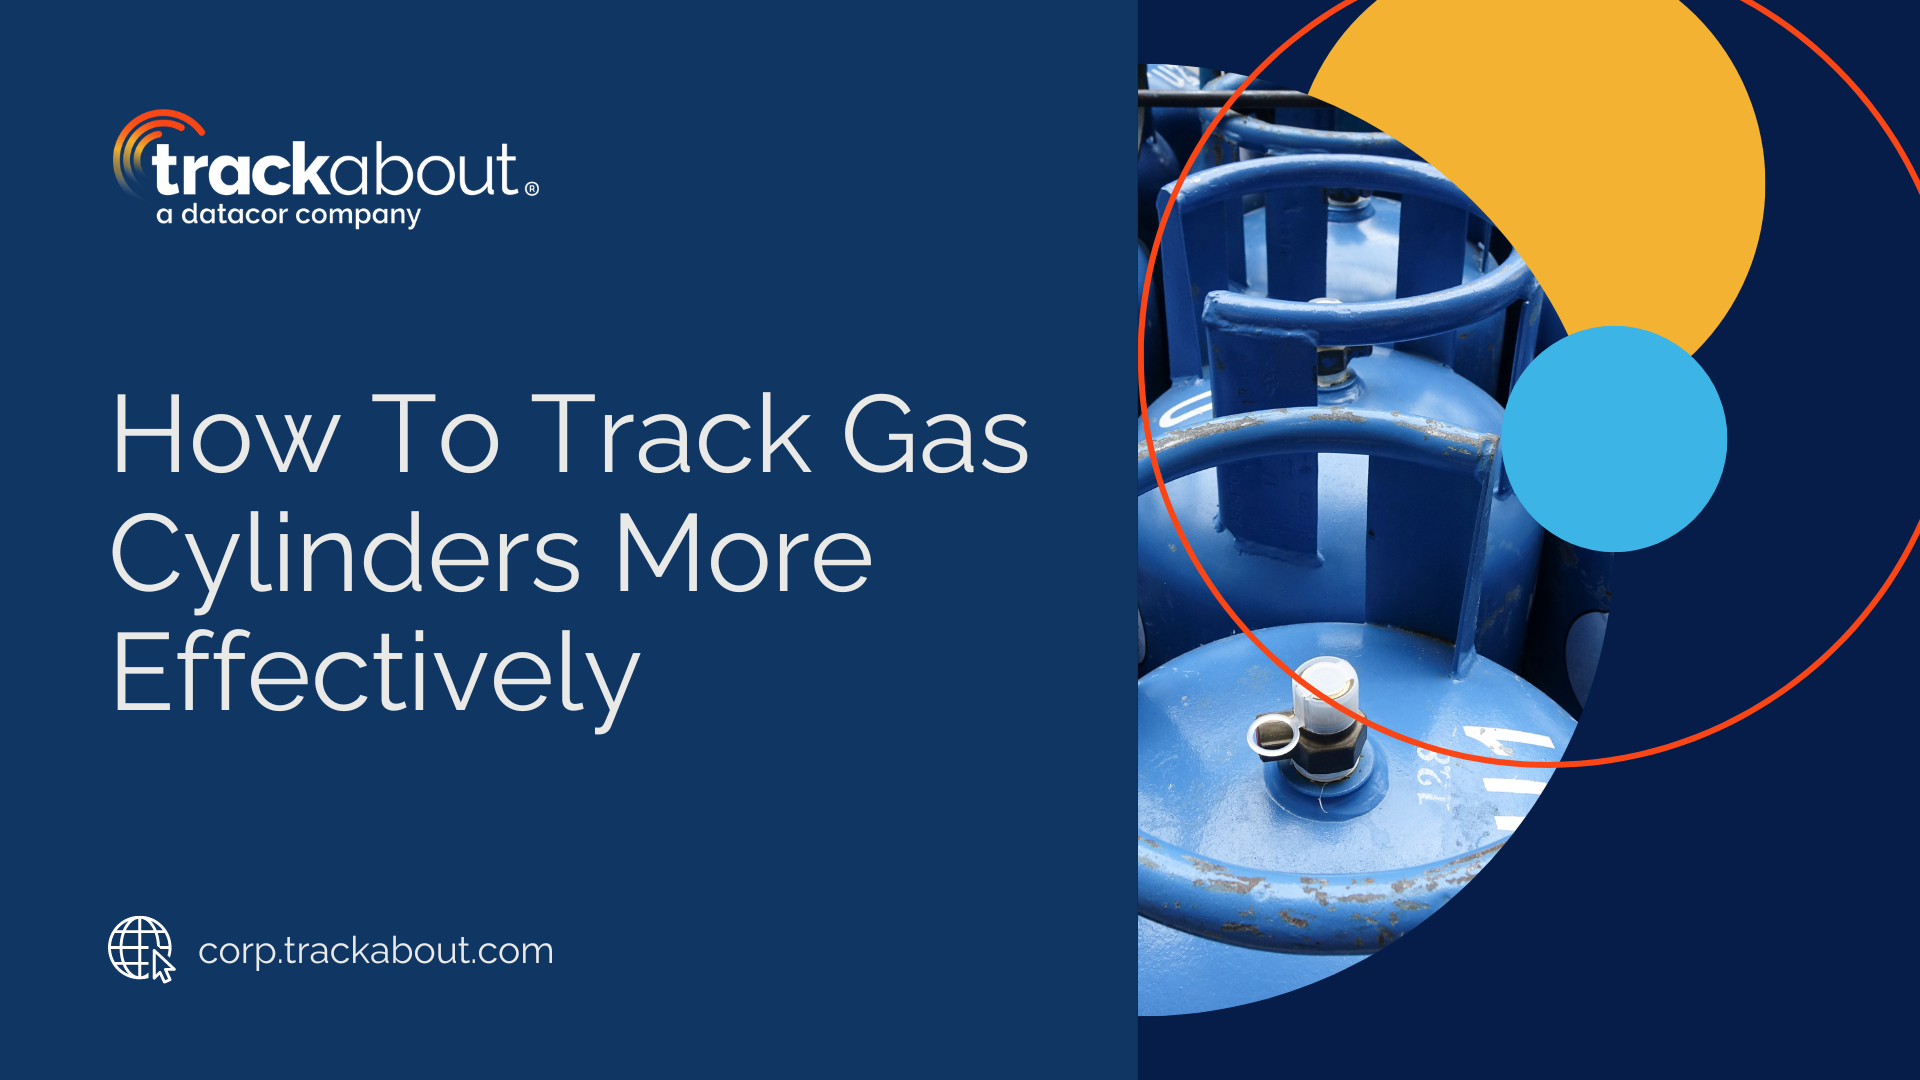 Ebook Trackabout How To Track Gas Cylinders